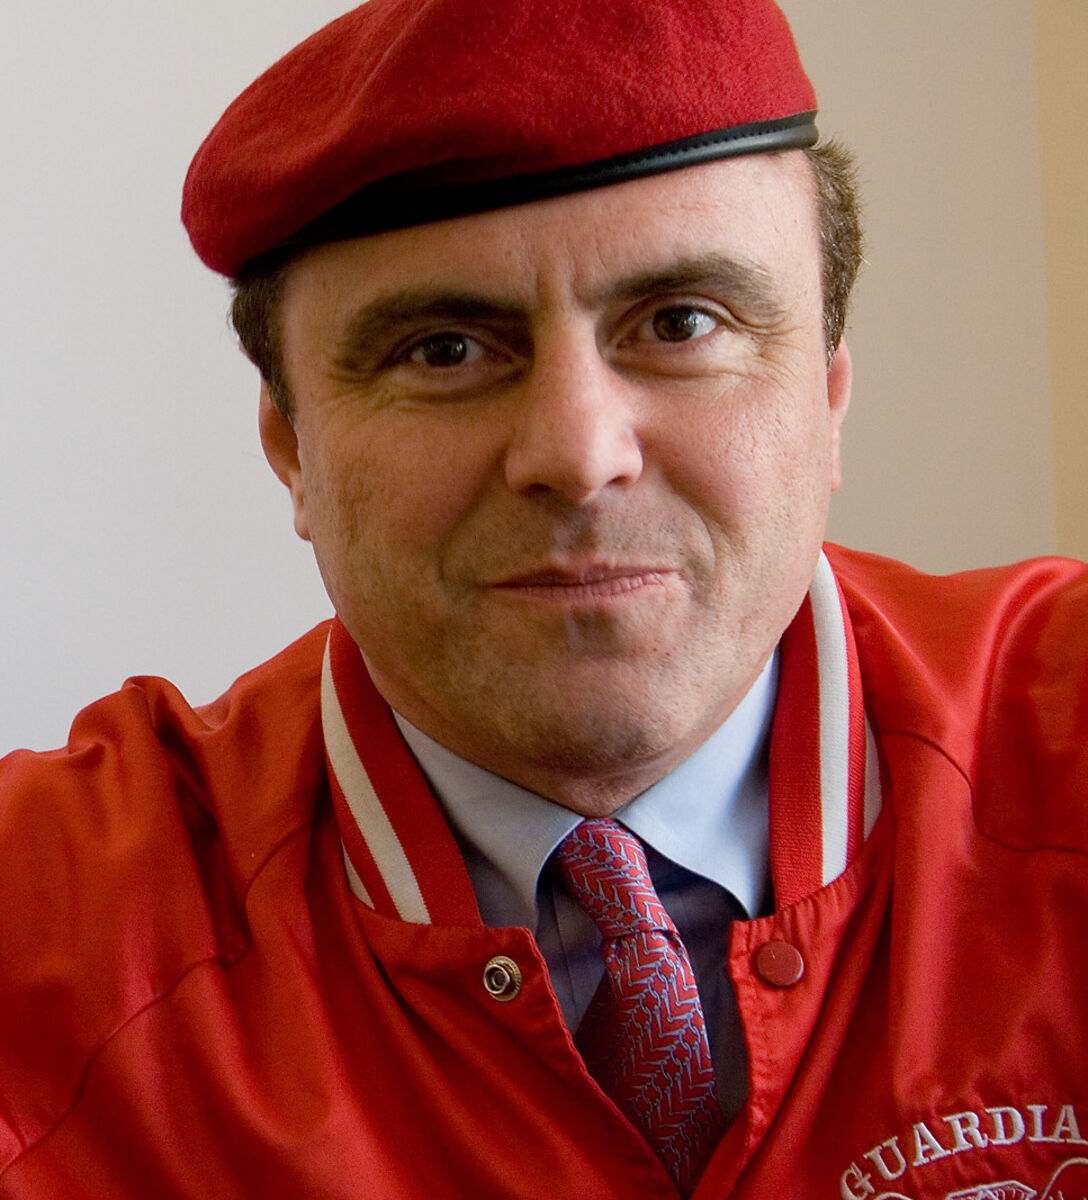 Curtis Sliwa - Famous Actor